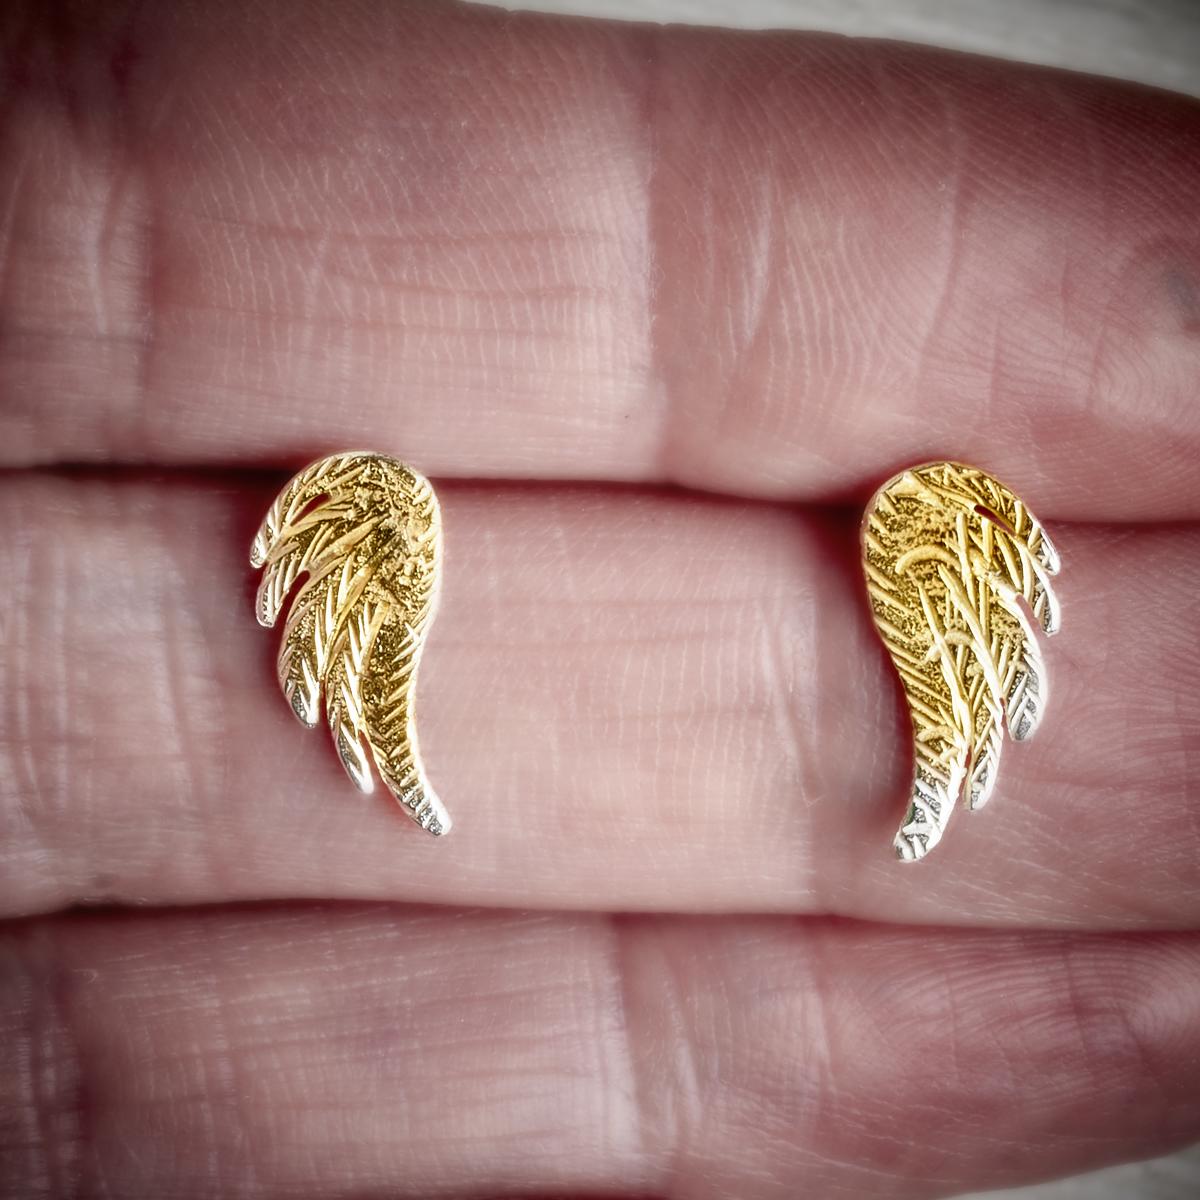 silver and gold angel wing stud earrings by Fi Mehra available from the jewellery makers, IMAGE property of EMMA WHITE-2